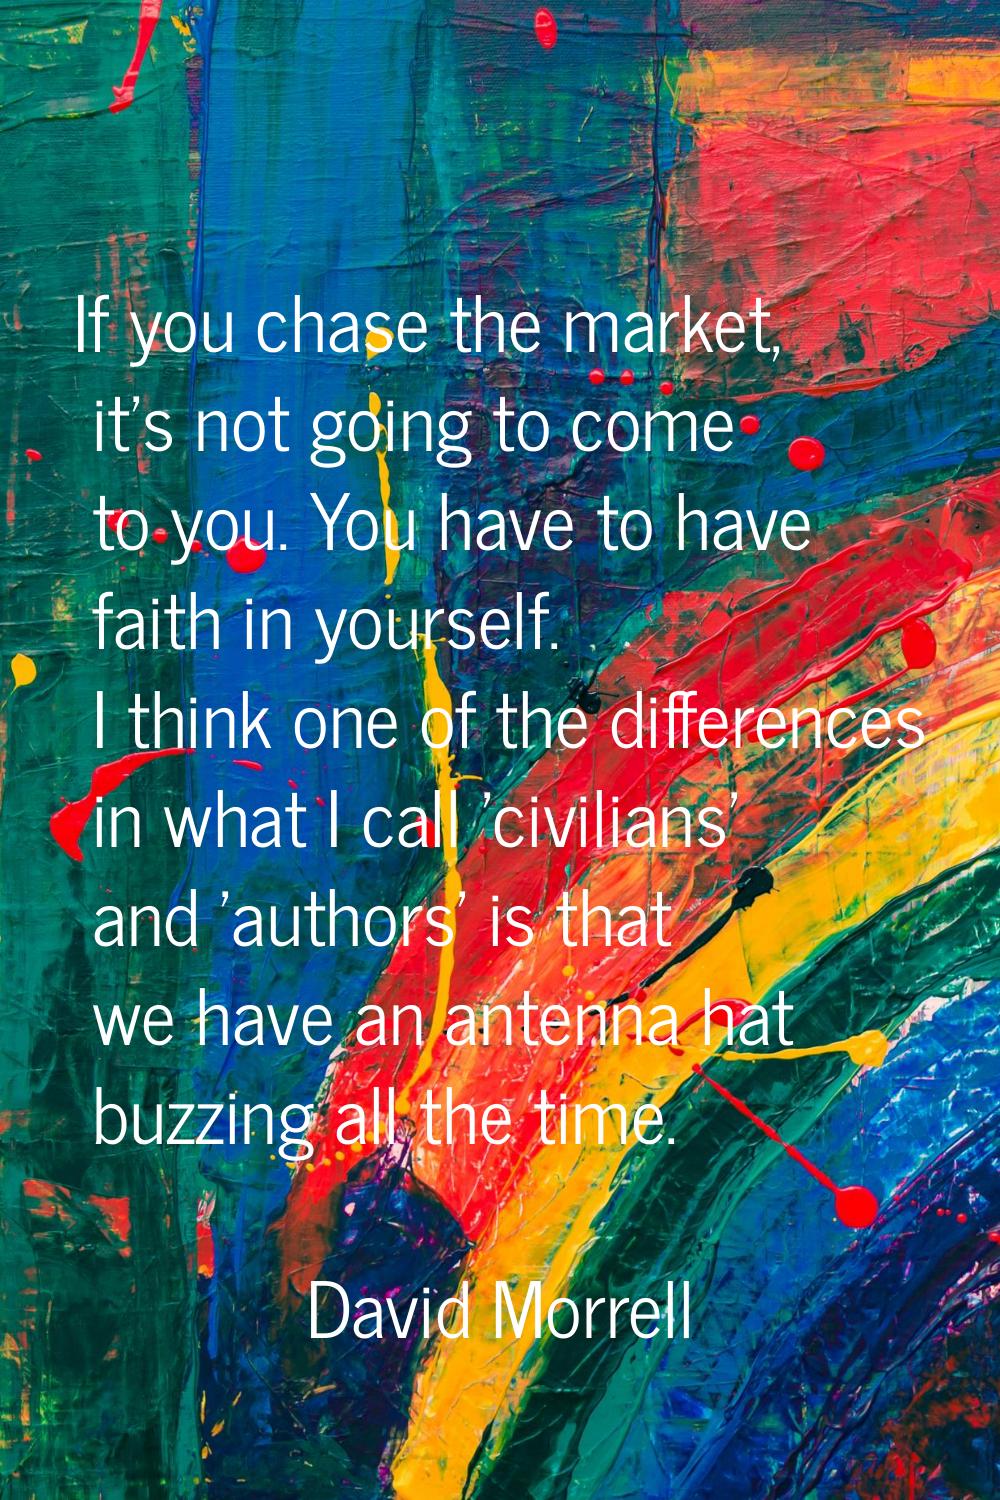 If you chase the market, it's not going to come to you. You have to have faith in yourself. I think